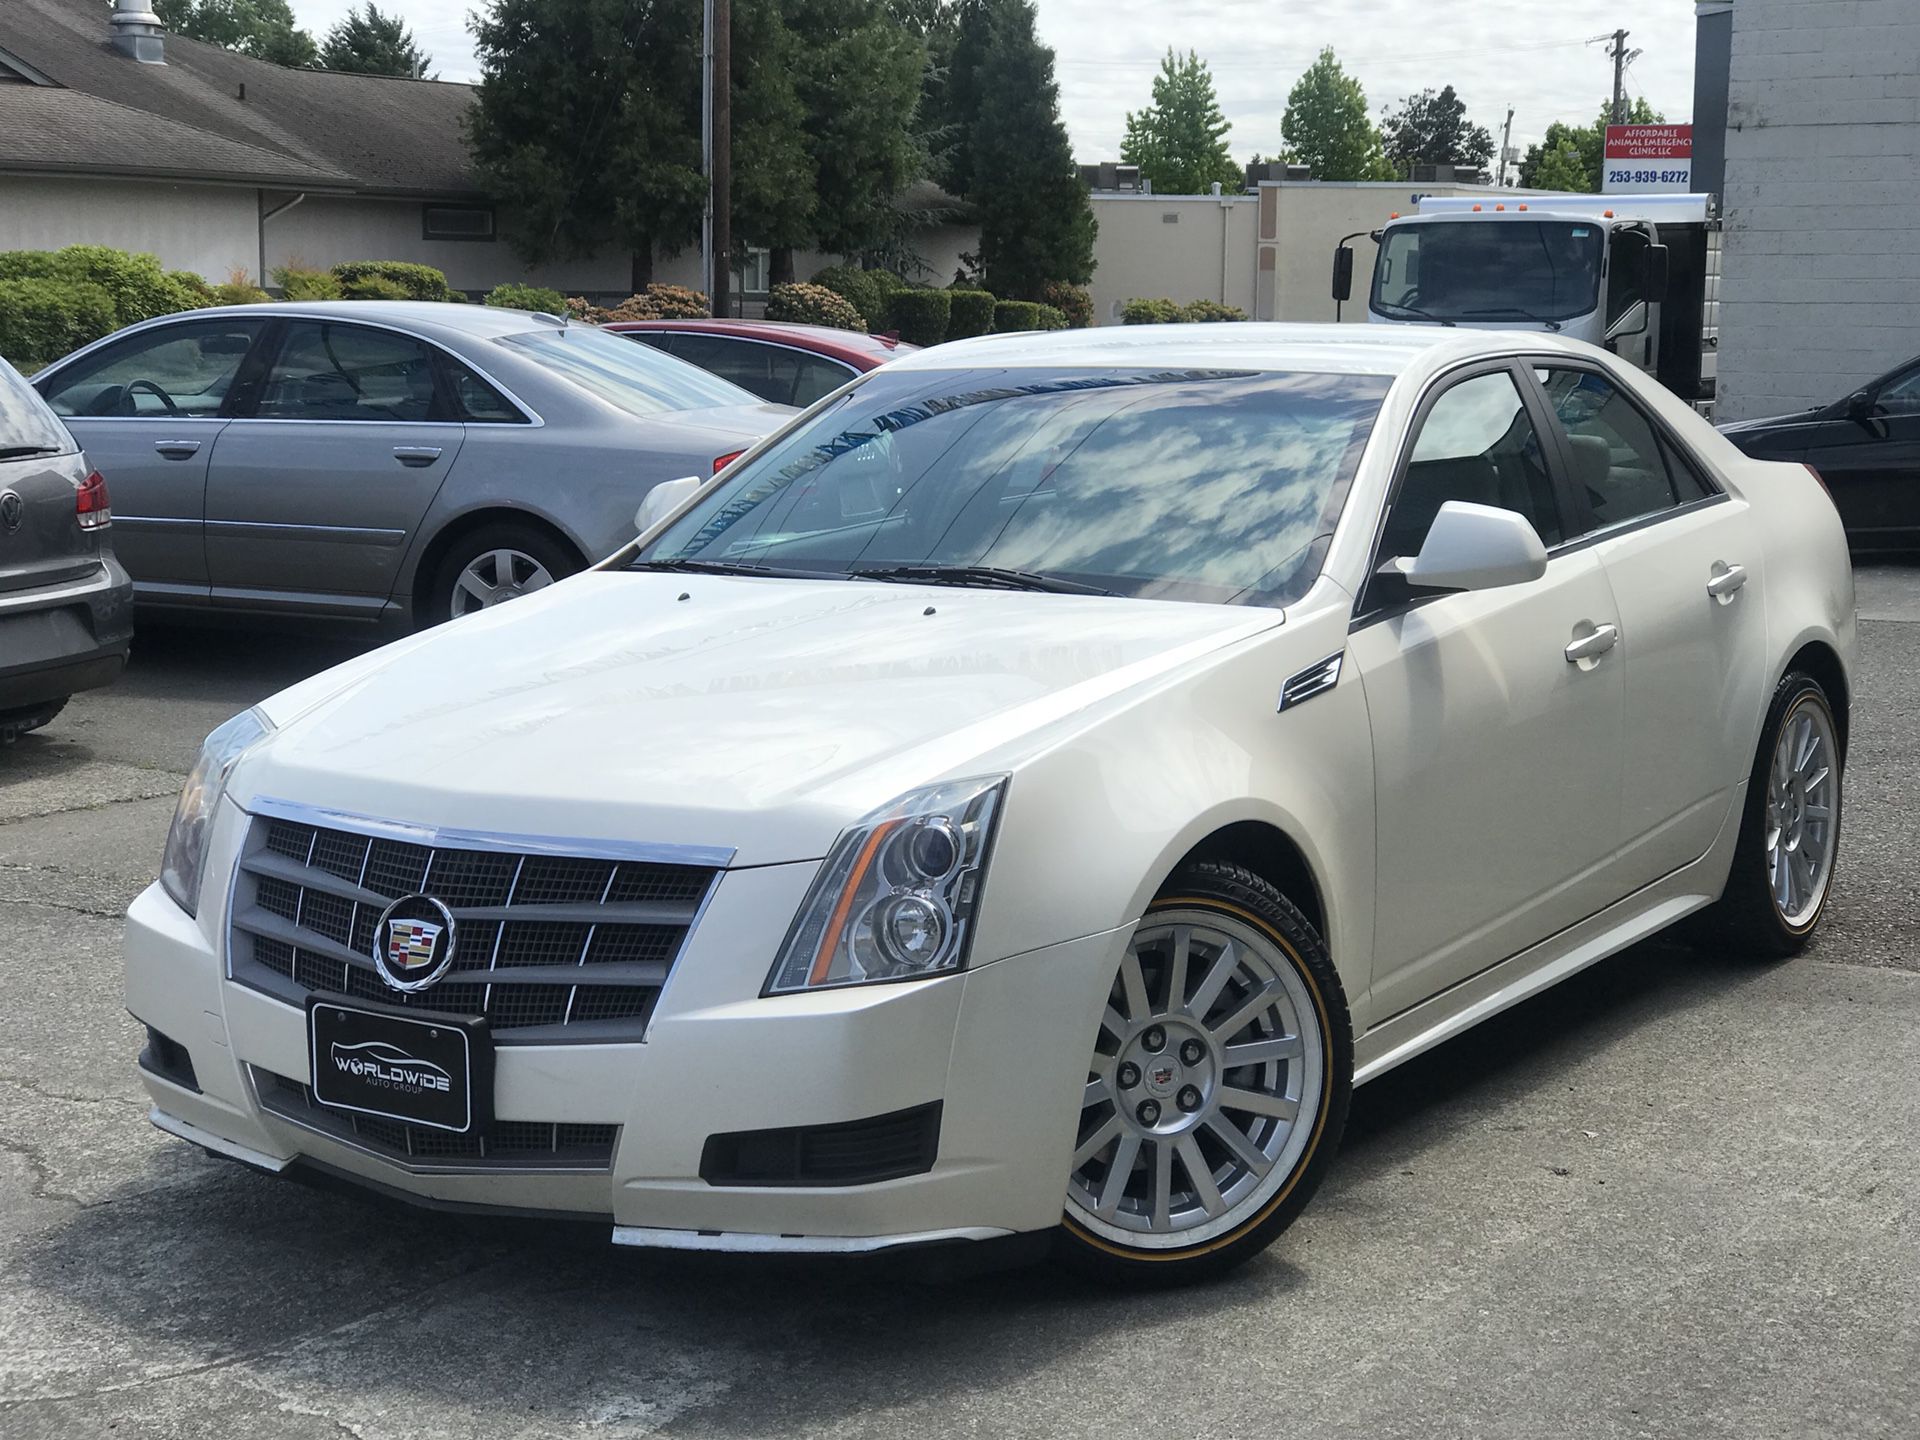 2010 Cadillac CTS V6 3.0 Clean Title Off White Color dts sts